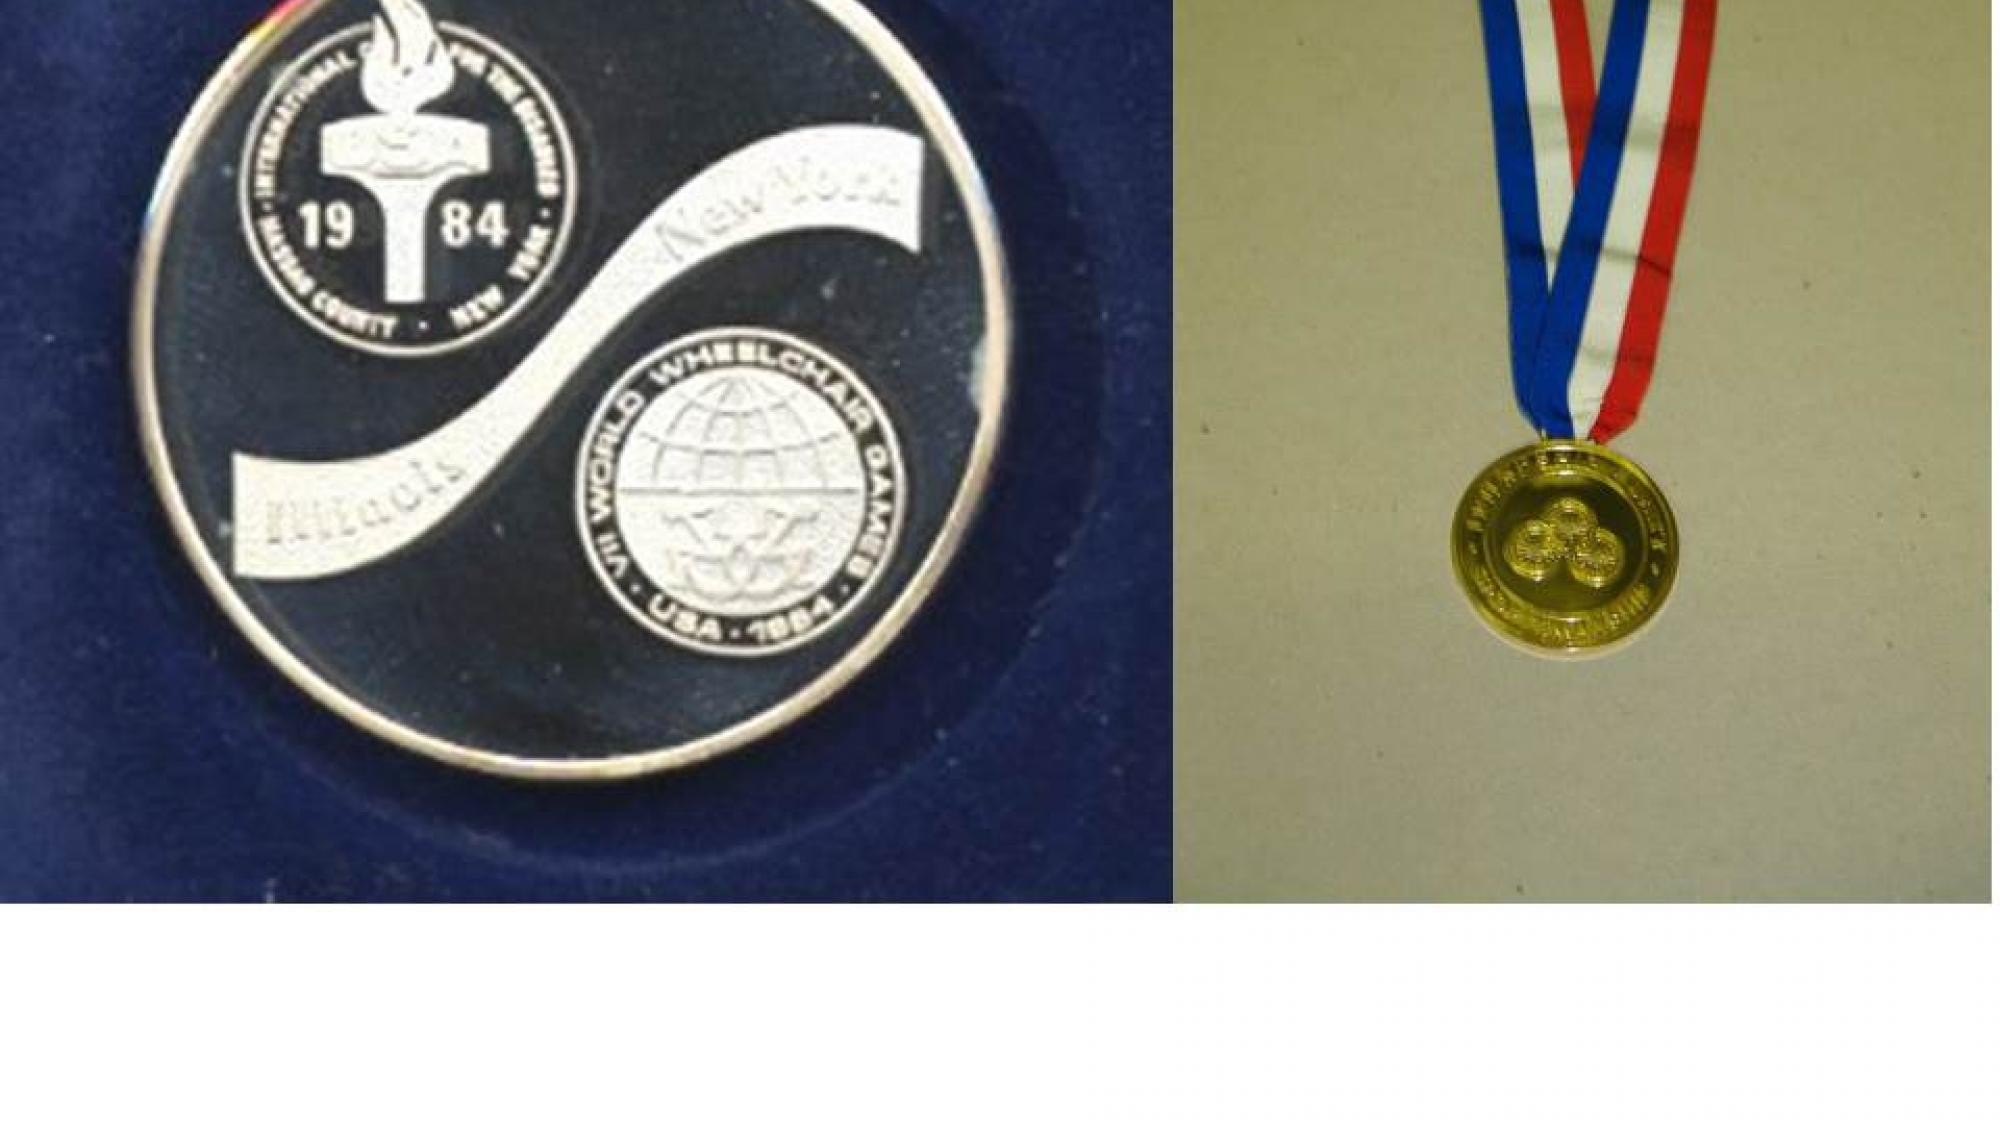 The medals of the New York / Stoke Mandeville 1984 Paralympic Games